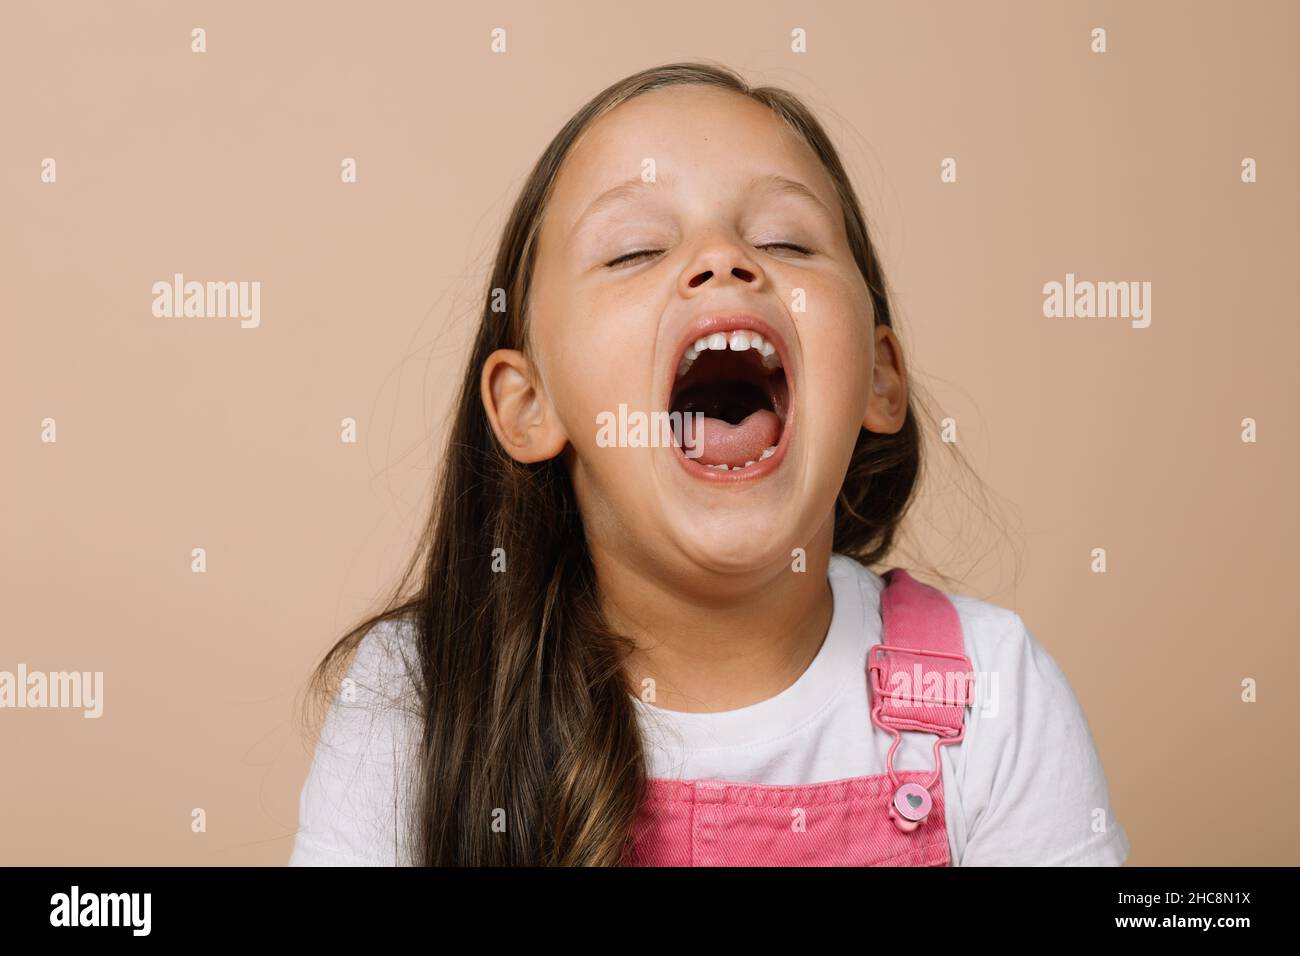 Little girl with fully opened mouth and closed eyes yawning looking tired wearing bright pink jumpsuit and white t-shirt on beige background Stock Photo